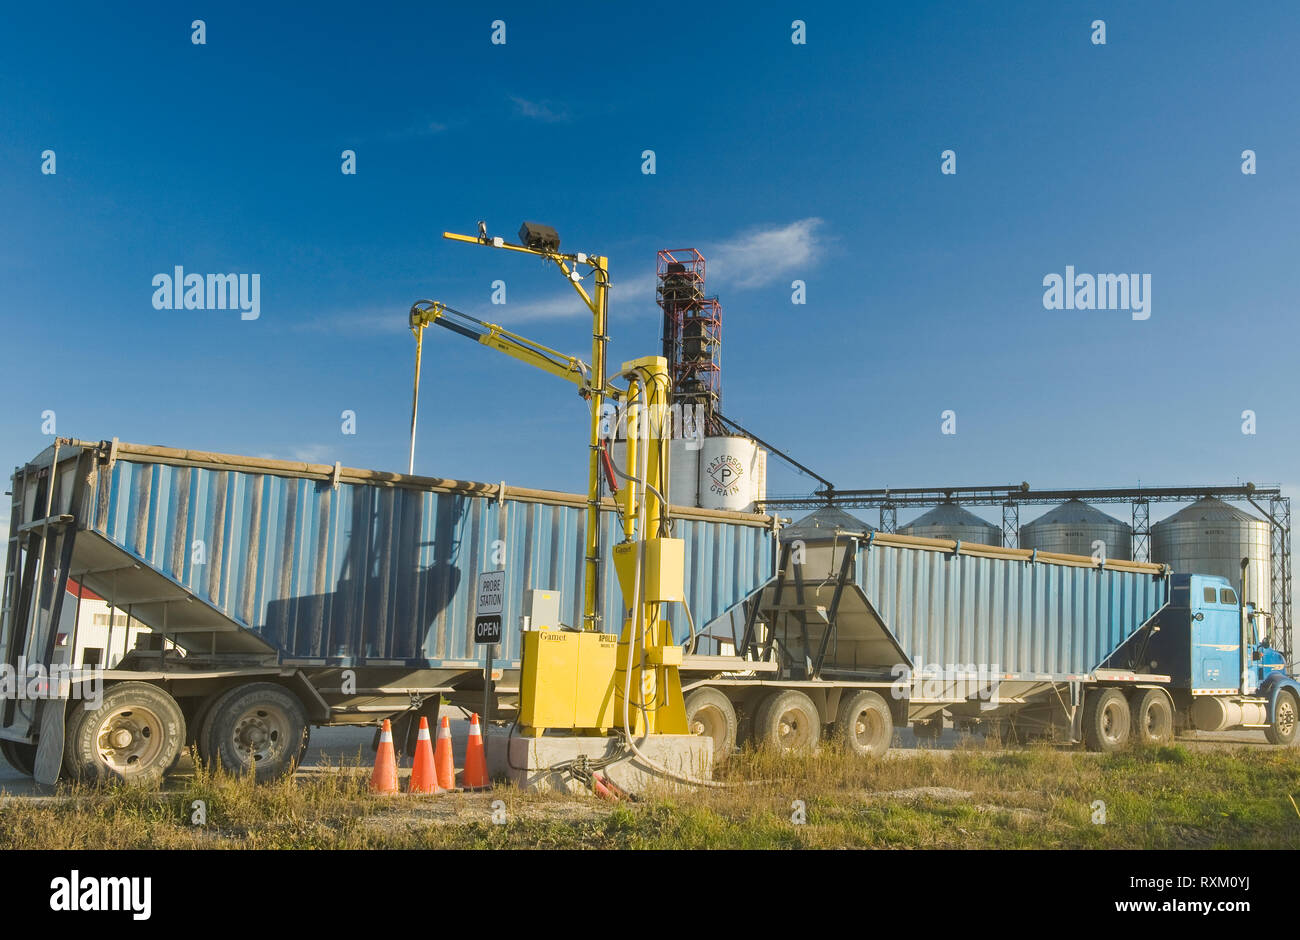 a moisture probe checks a load of soybeans in a farm truck hauling the crop to an inland terminal, near Winnipeg, Manitoba, Canada Stock Photo